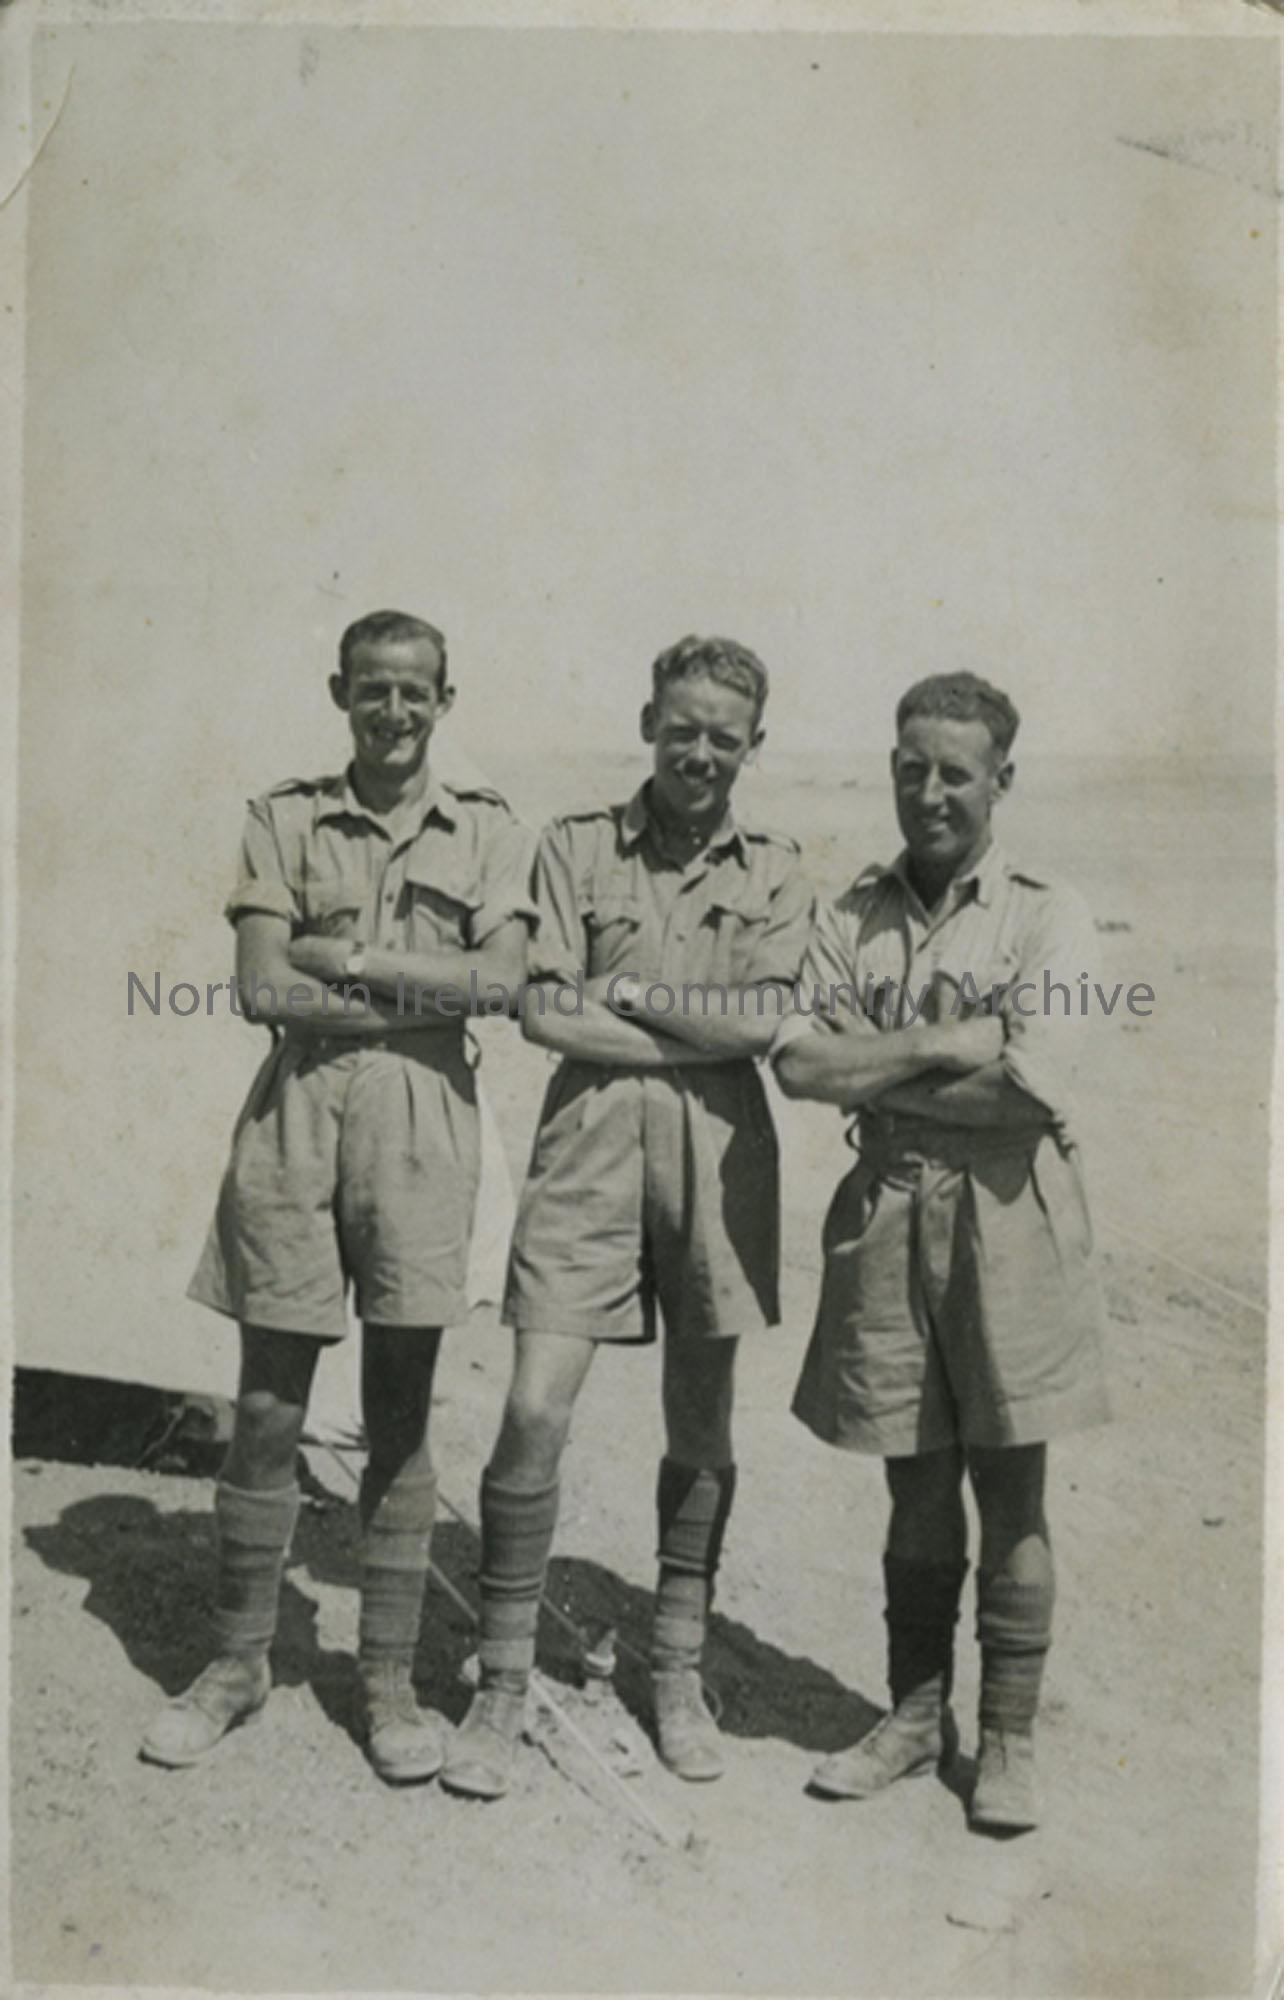 3 Soldiers in the Western Desert – NI Archive